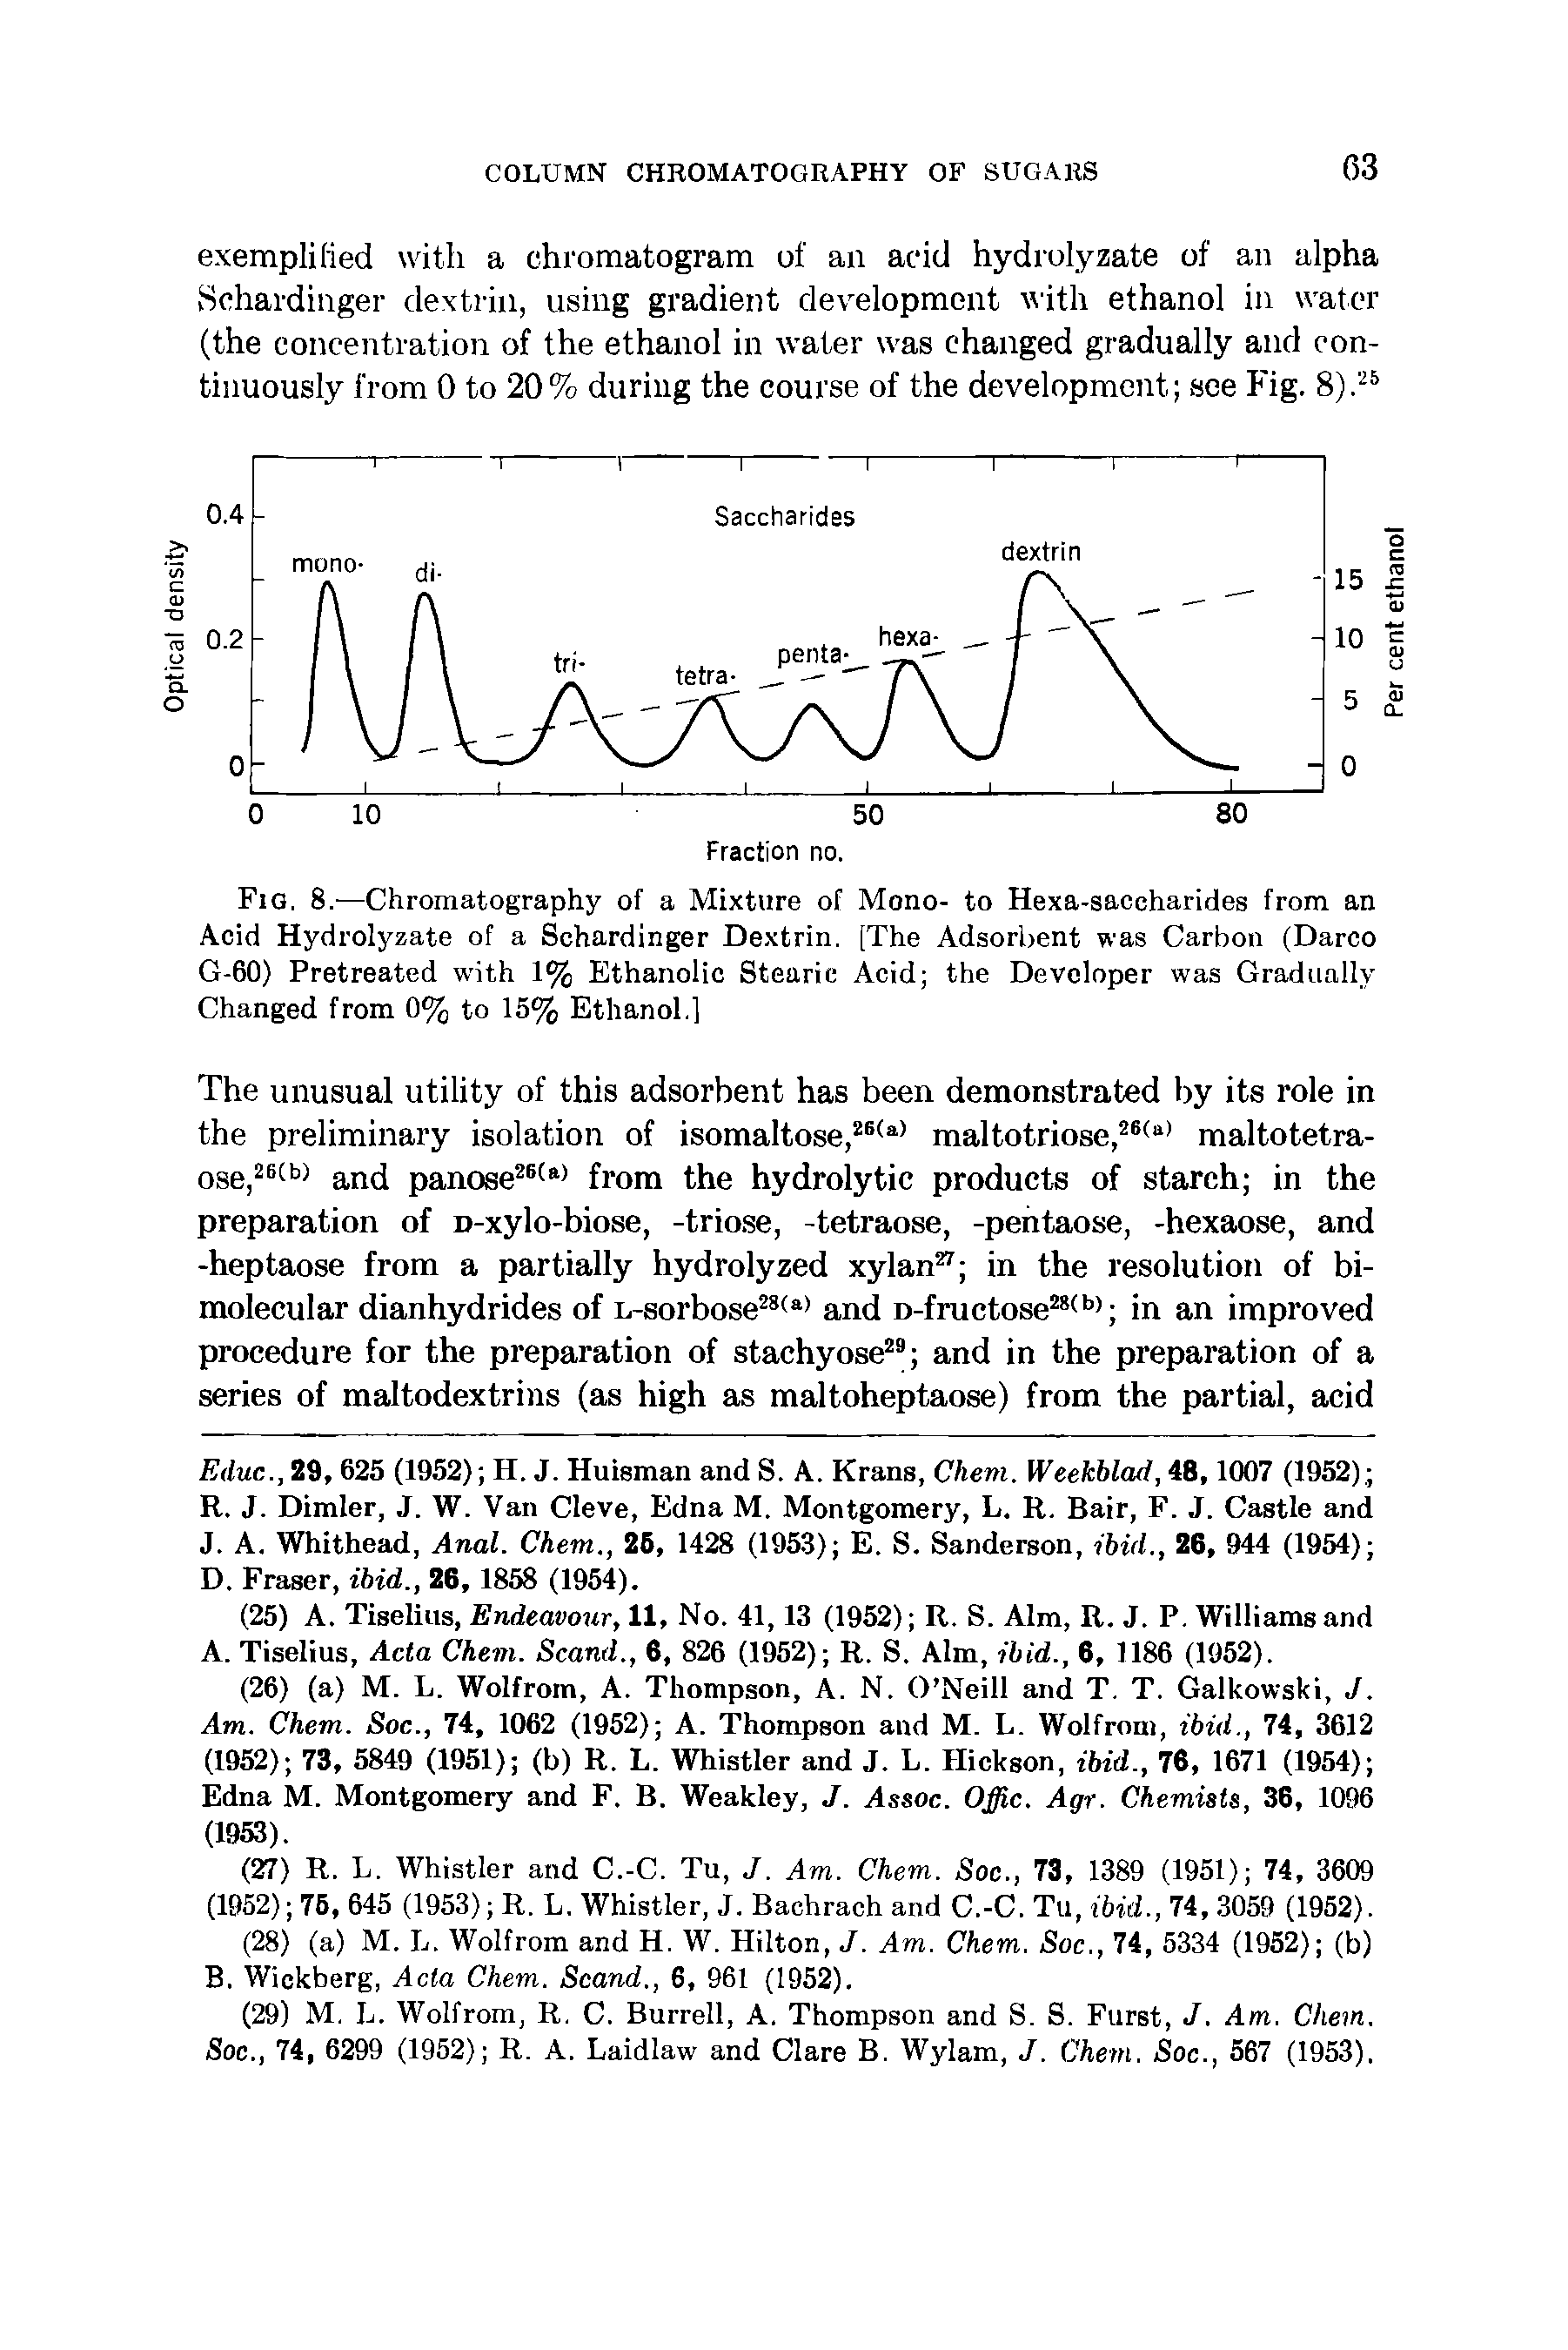 Fig. 8.—Chromatography of a Mixture of Mono- to Hexa-saccharides from an Acid Hydrolyzate of a Schardinger Dextrin. [The Adsorbent was Carbon (Darco G-60) Pretreated with 1% Ethanolic Stearic Acid the Developer was Gradually Changed from 0% to 15% Ethanol.]...